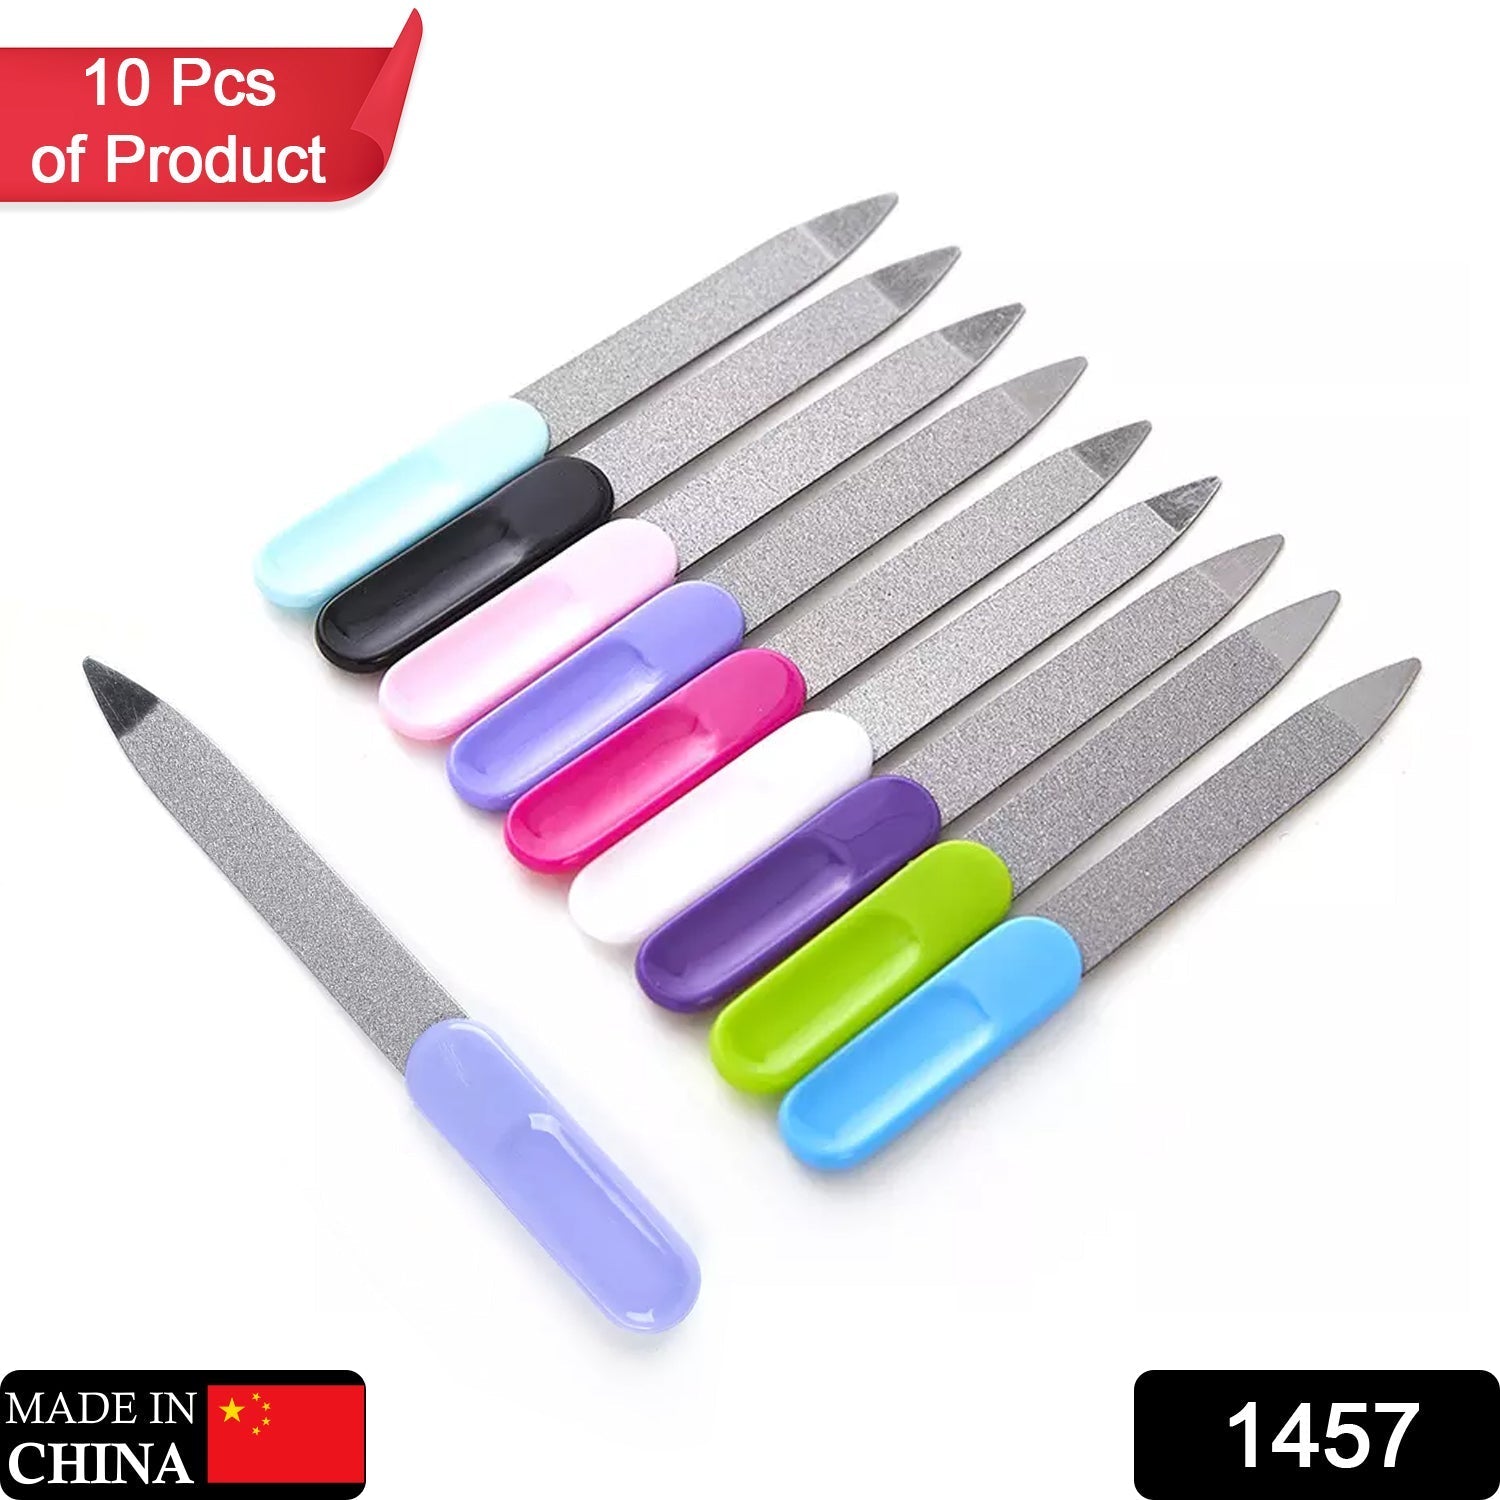 1457 Stainless Steel Professional Nail File Double Sides Great for Thick Nails ( 10 pcs ) DukanDaily